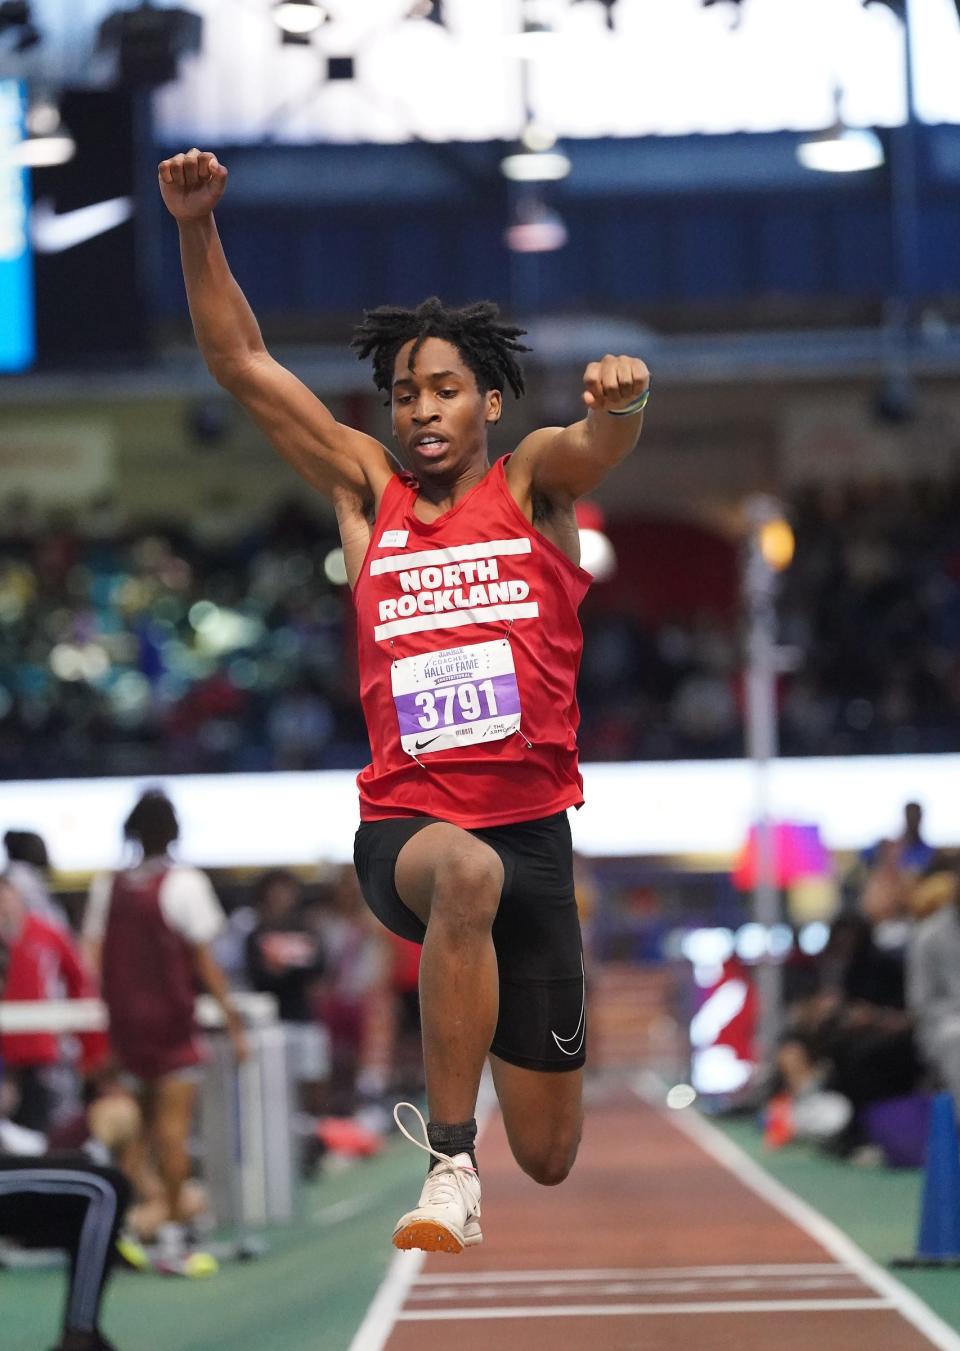 North Rockland's Shamell Roberts competes in the triple-jump at The JAMBAR Coaches Hall of Fame Invitational at Armory Track & Field Center in New York on Saturday, Dec 16, 2023.